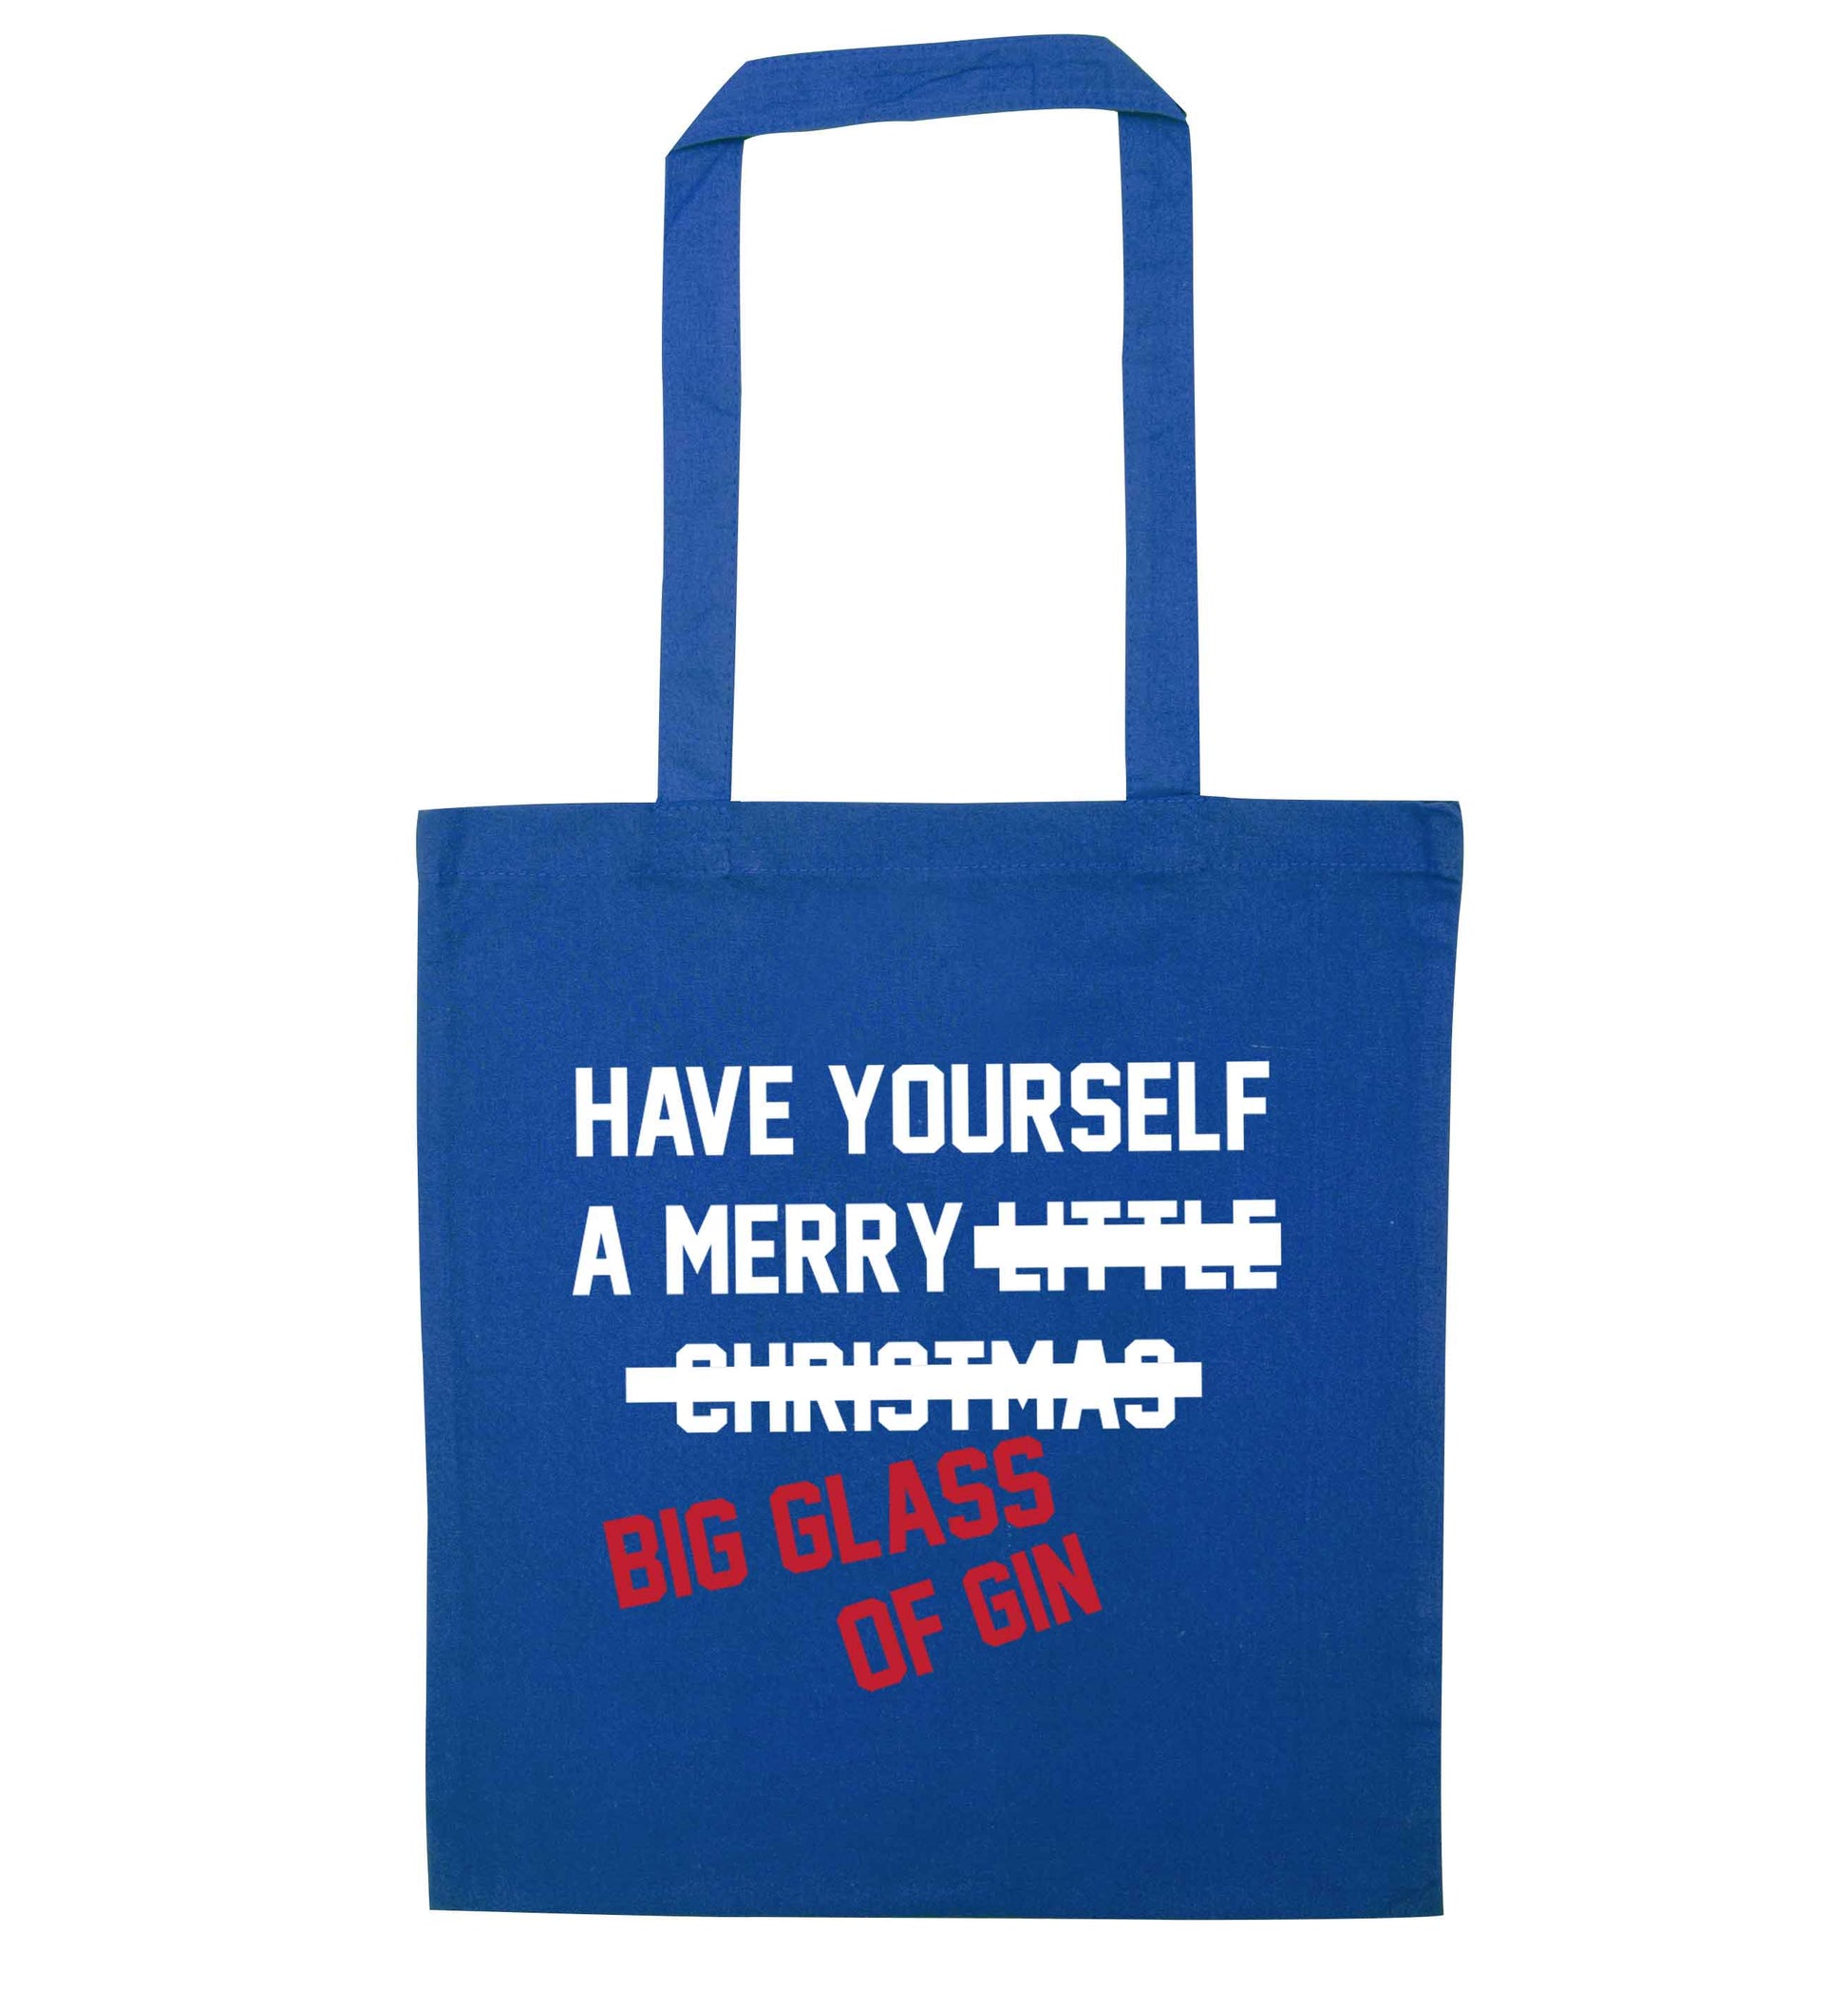 Have yourself a merry big glass of gin blue tote bag